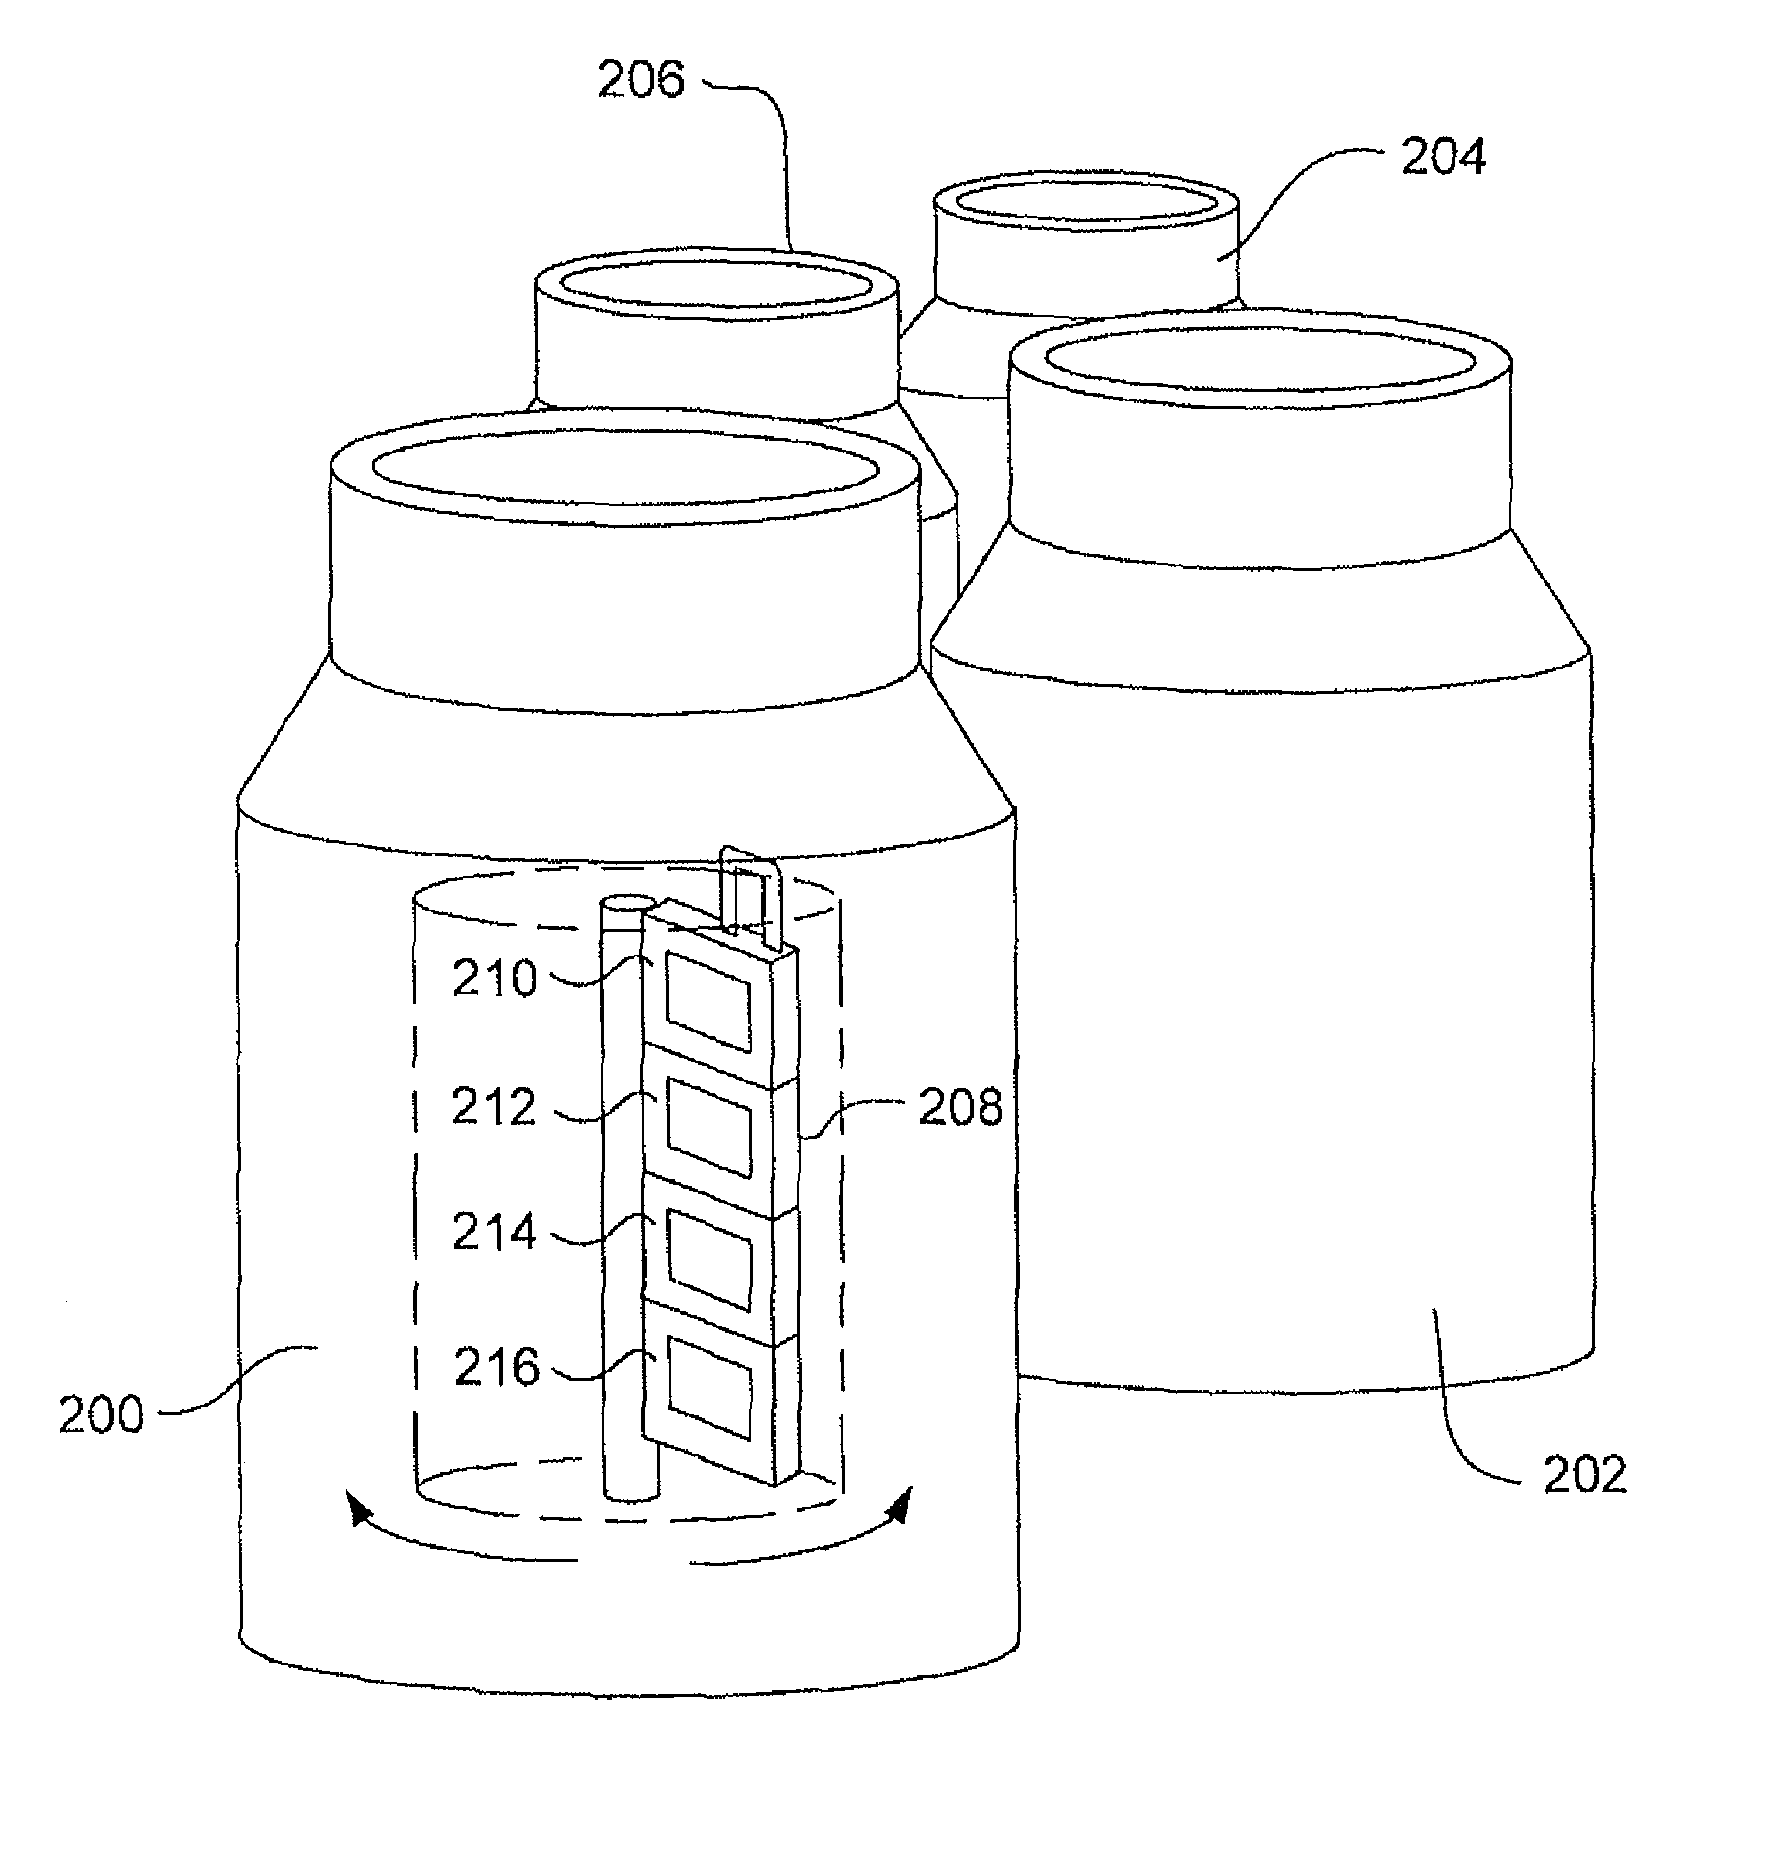 Biological sample storage and monitoring system